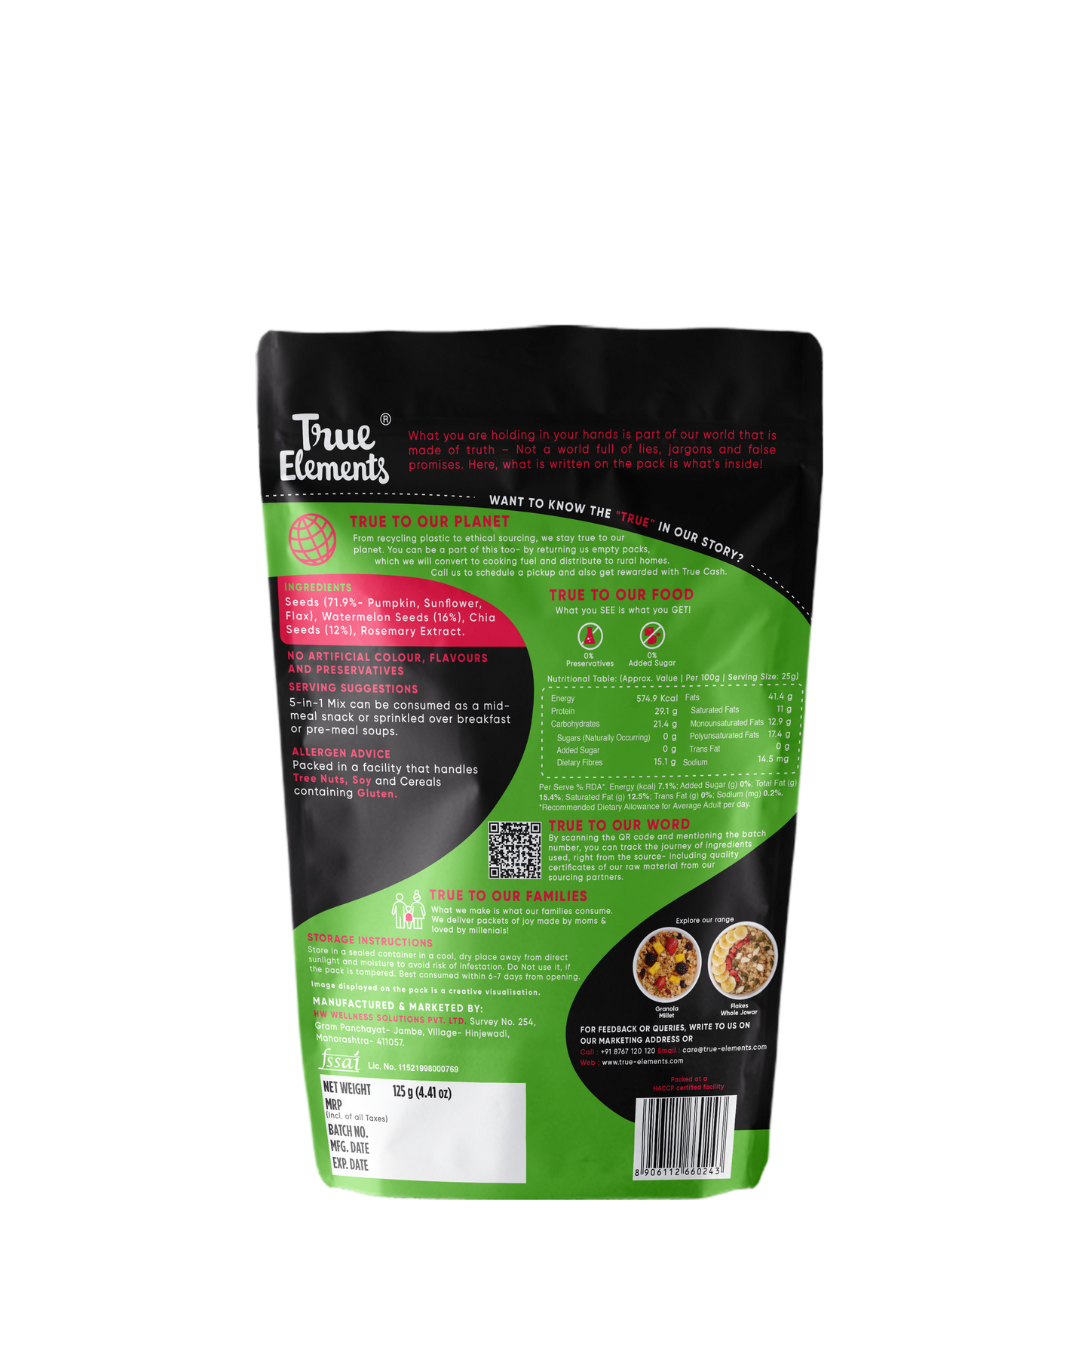 True elements 5 in 1 mix 125g pack ingredients and nutrients